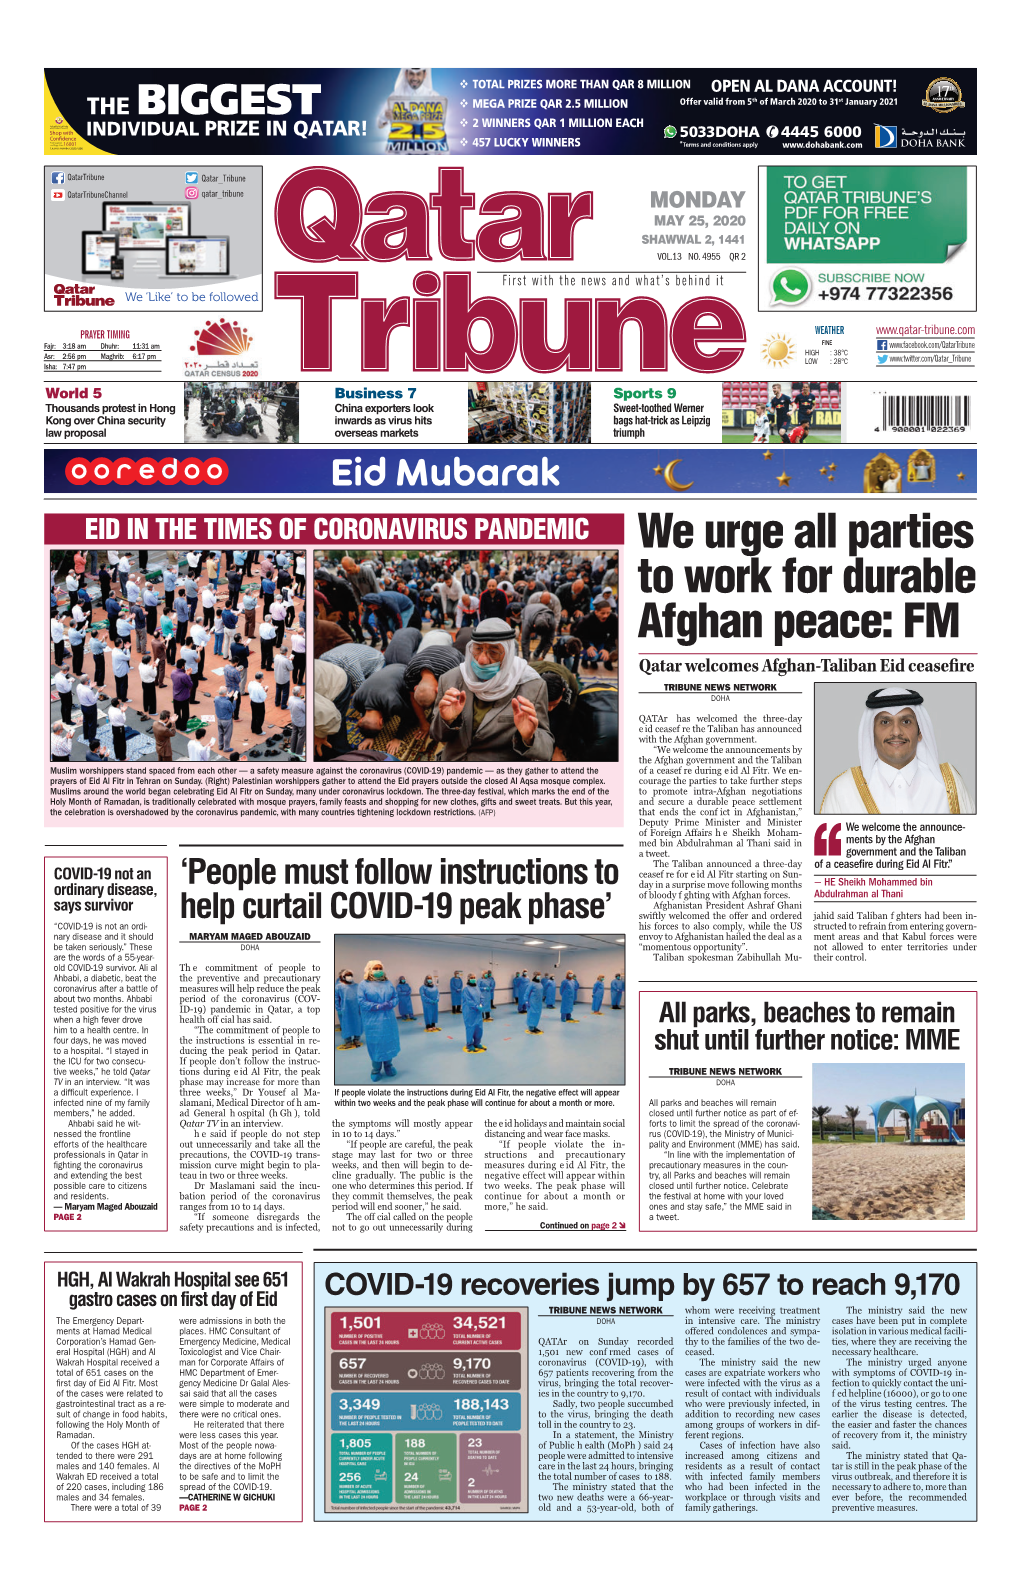 We Urge All Parties to Work for Durable Afghan Peace: FM Qatar Welcomes Afghan-Taliban Eid Ceasefire Tribune News Network Doha